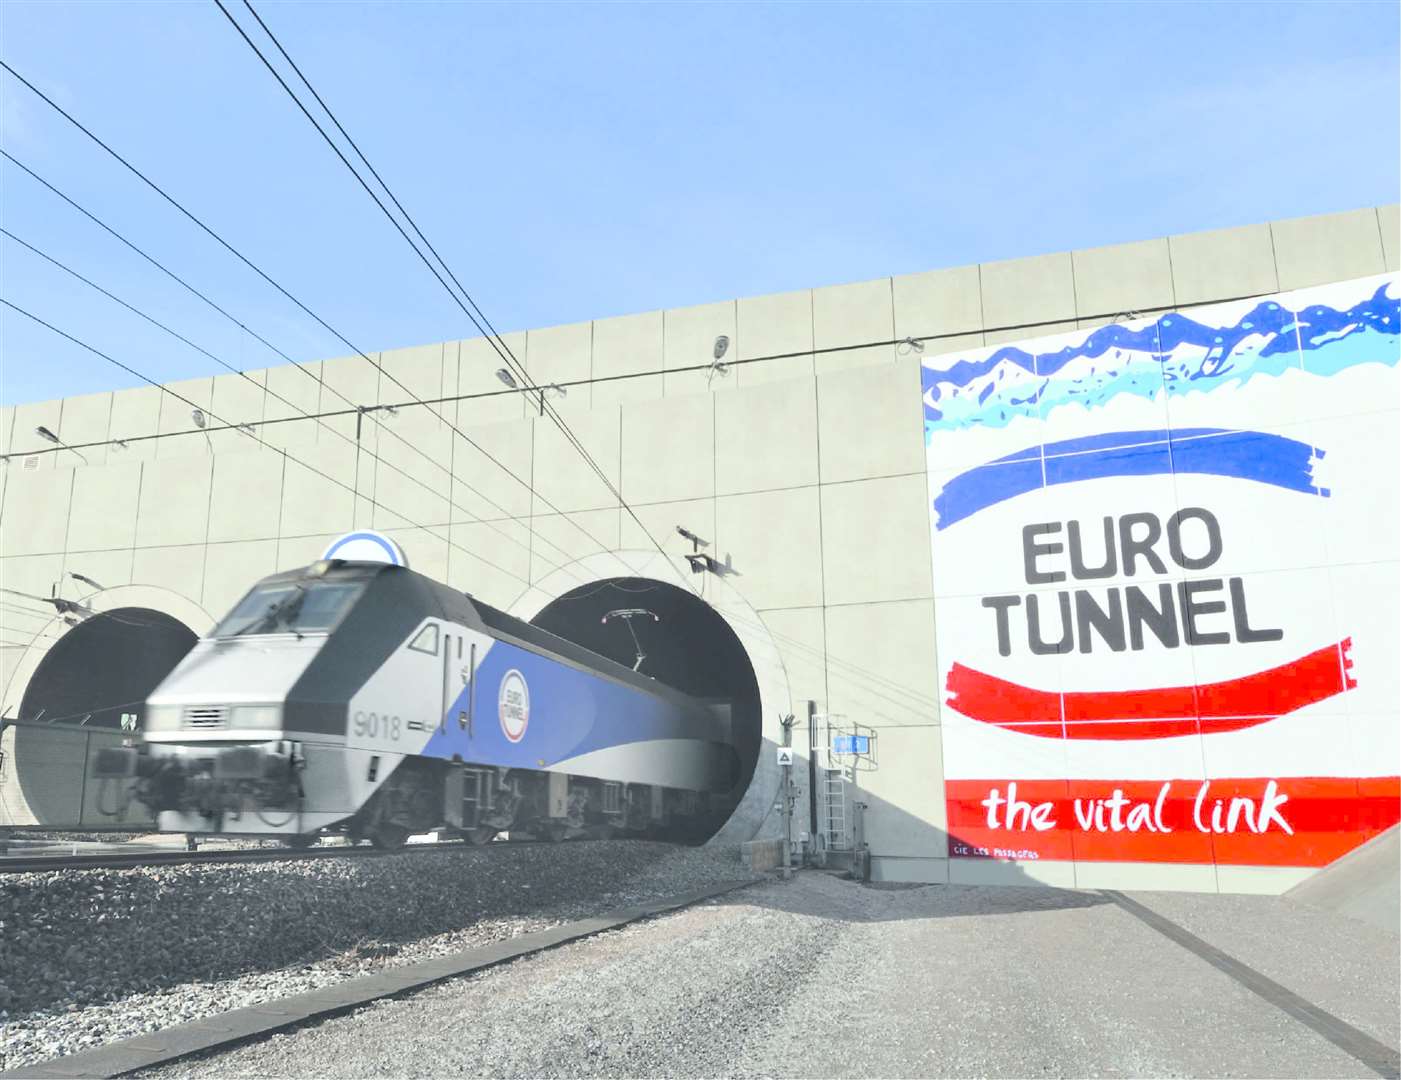 It takes just 35 minutes on Eurotunnel Le Shuttle to get from Folkestone to Calais. Stock picture